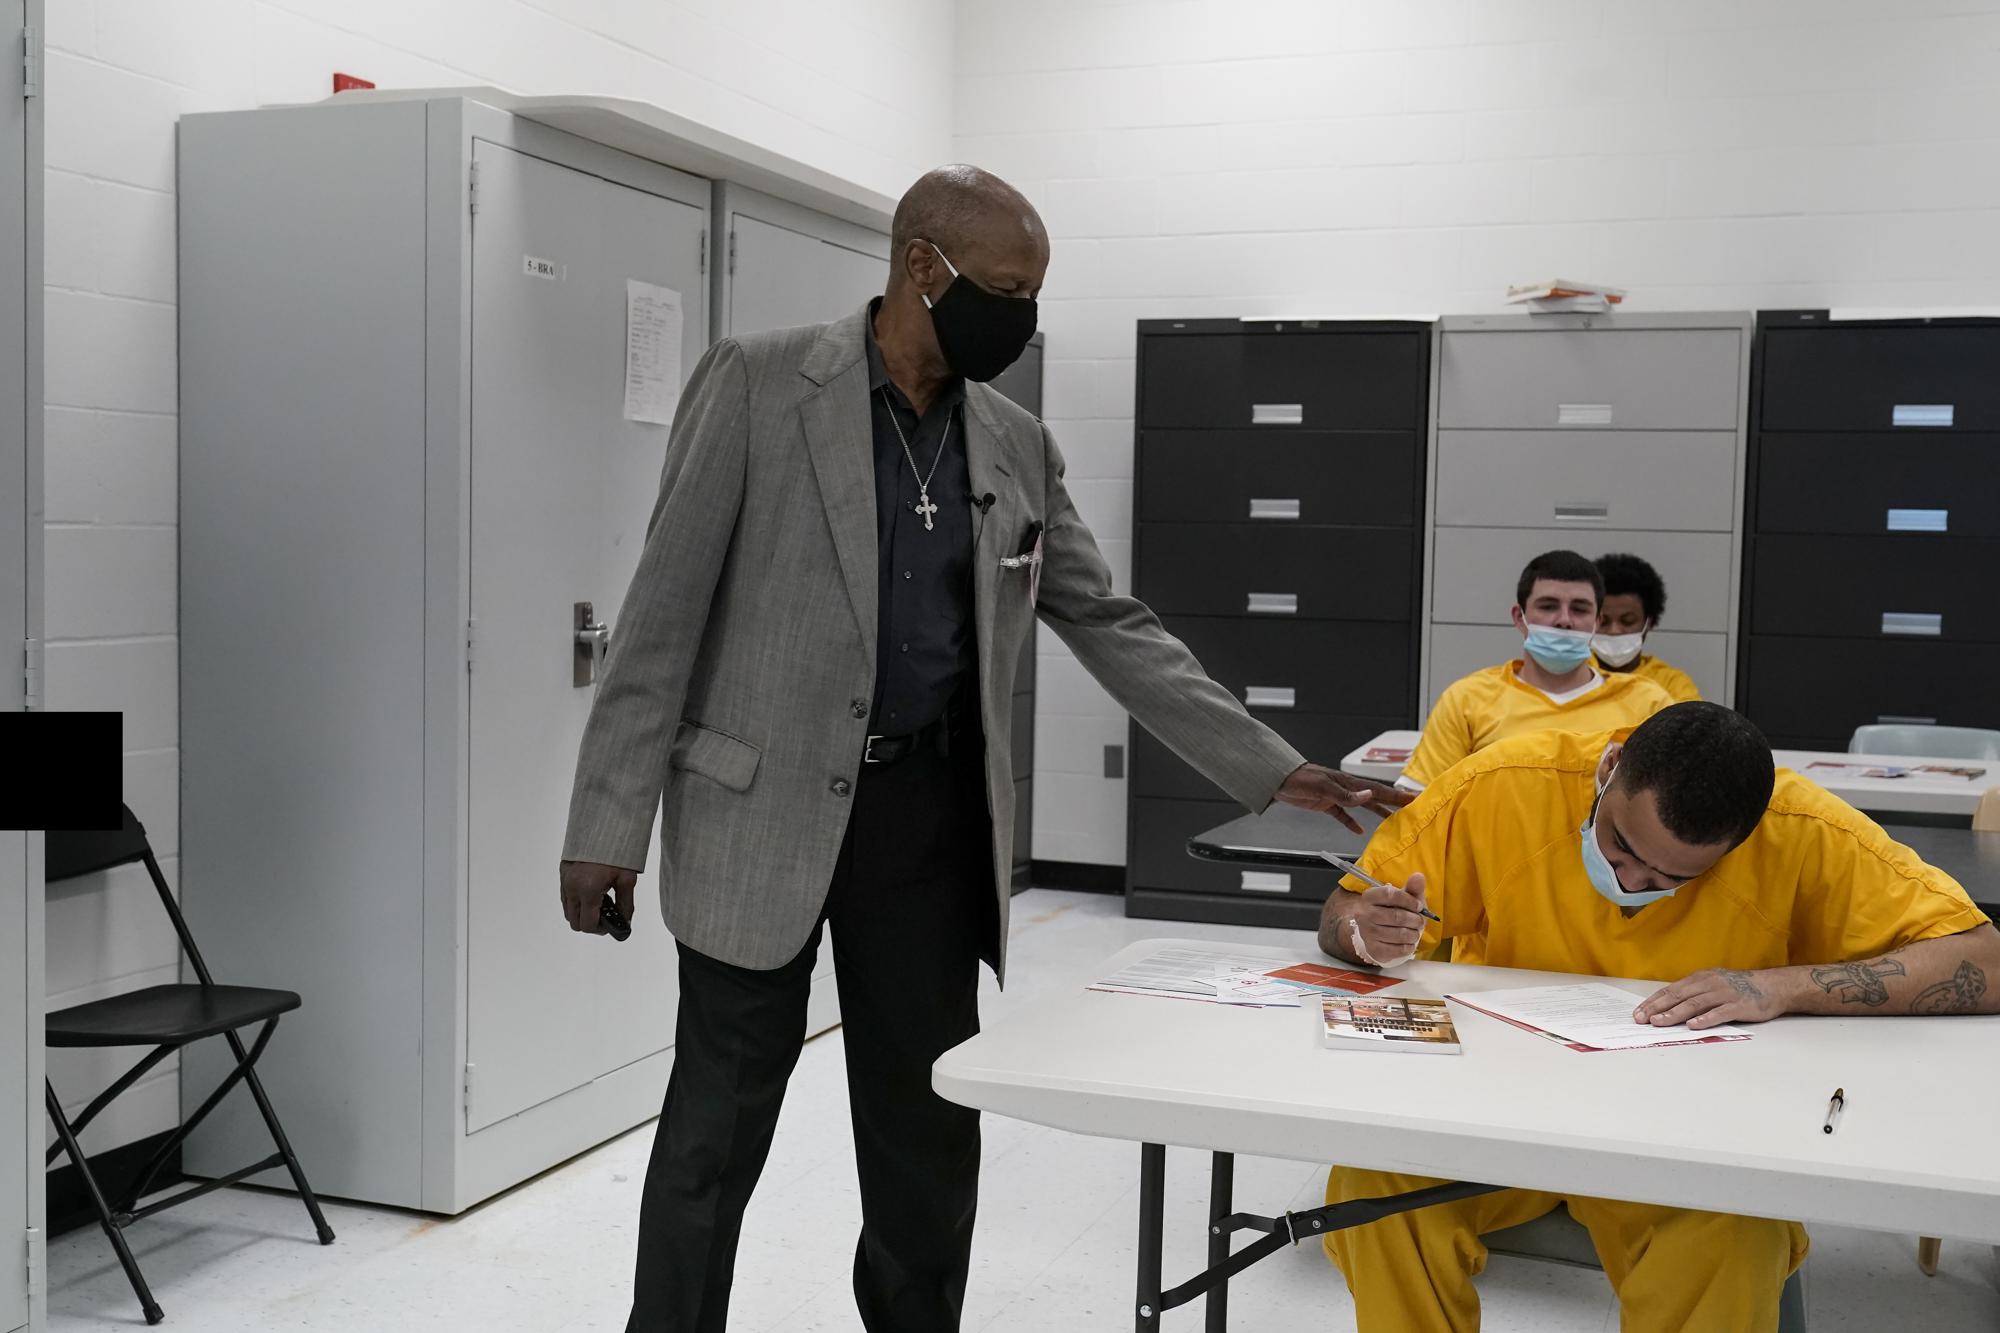 The Rev. Burton Barr works with inmates at the St. Louis City Justice Center on Thursday, May 20, 2021. He calls himself “the hoodlum preacher” and he goes to the jail twice a week to try to save people from the addiction that consumed his life for 22 years. The face of addiction then was inner-city Black people like him, and they were criminalized. Barr once tried to tally the number of times he went to jail, and he stopped counting at 30. (AP Photo/Brynn Anderson)